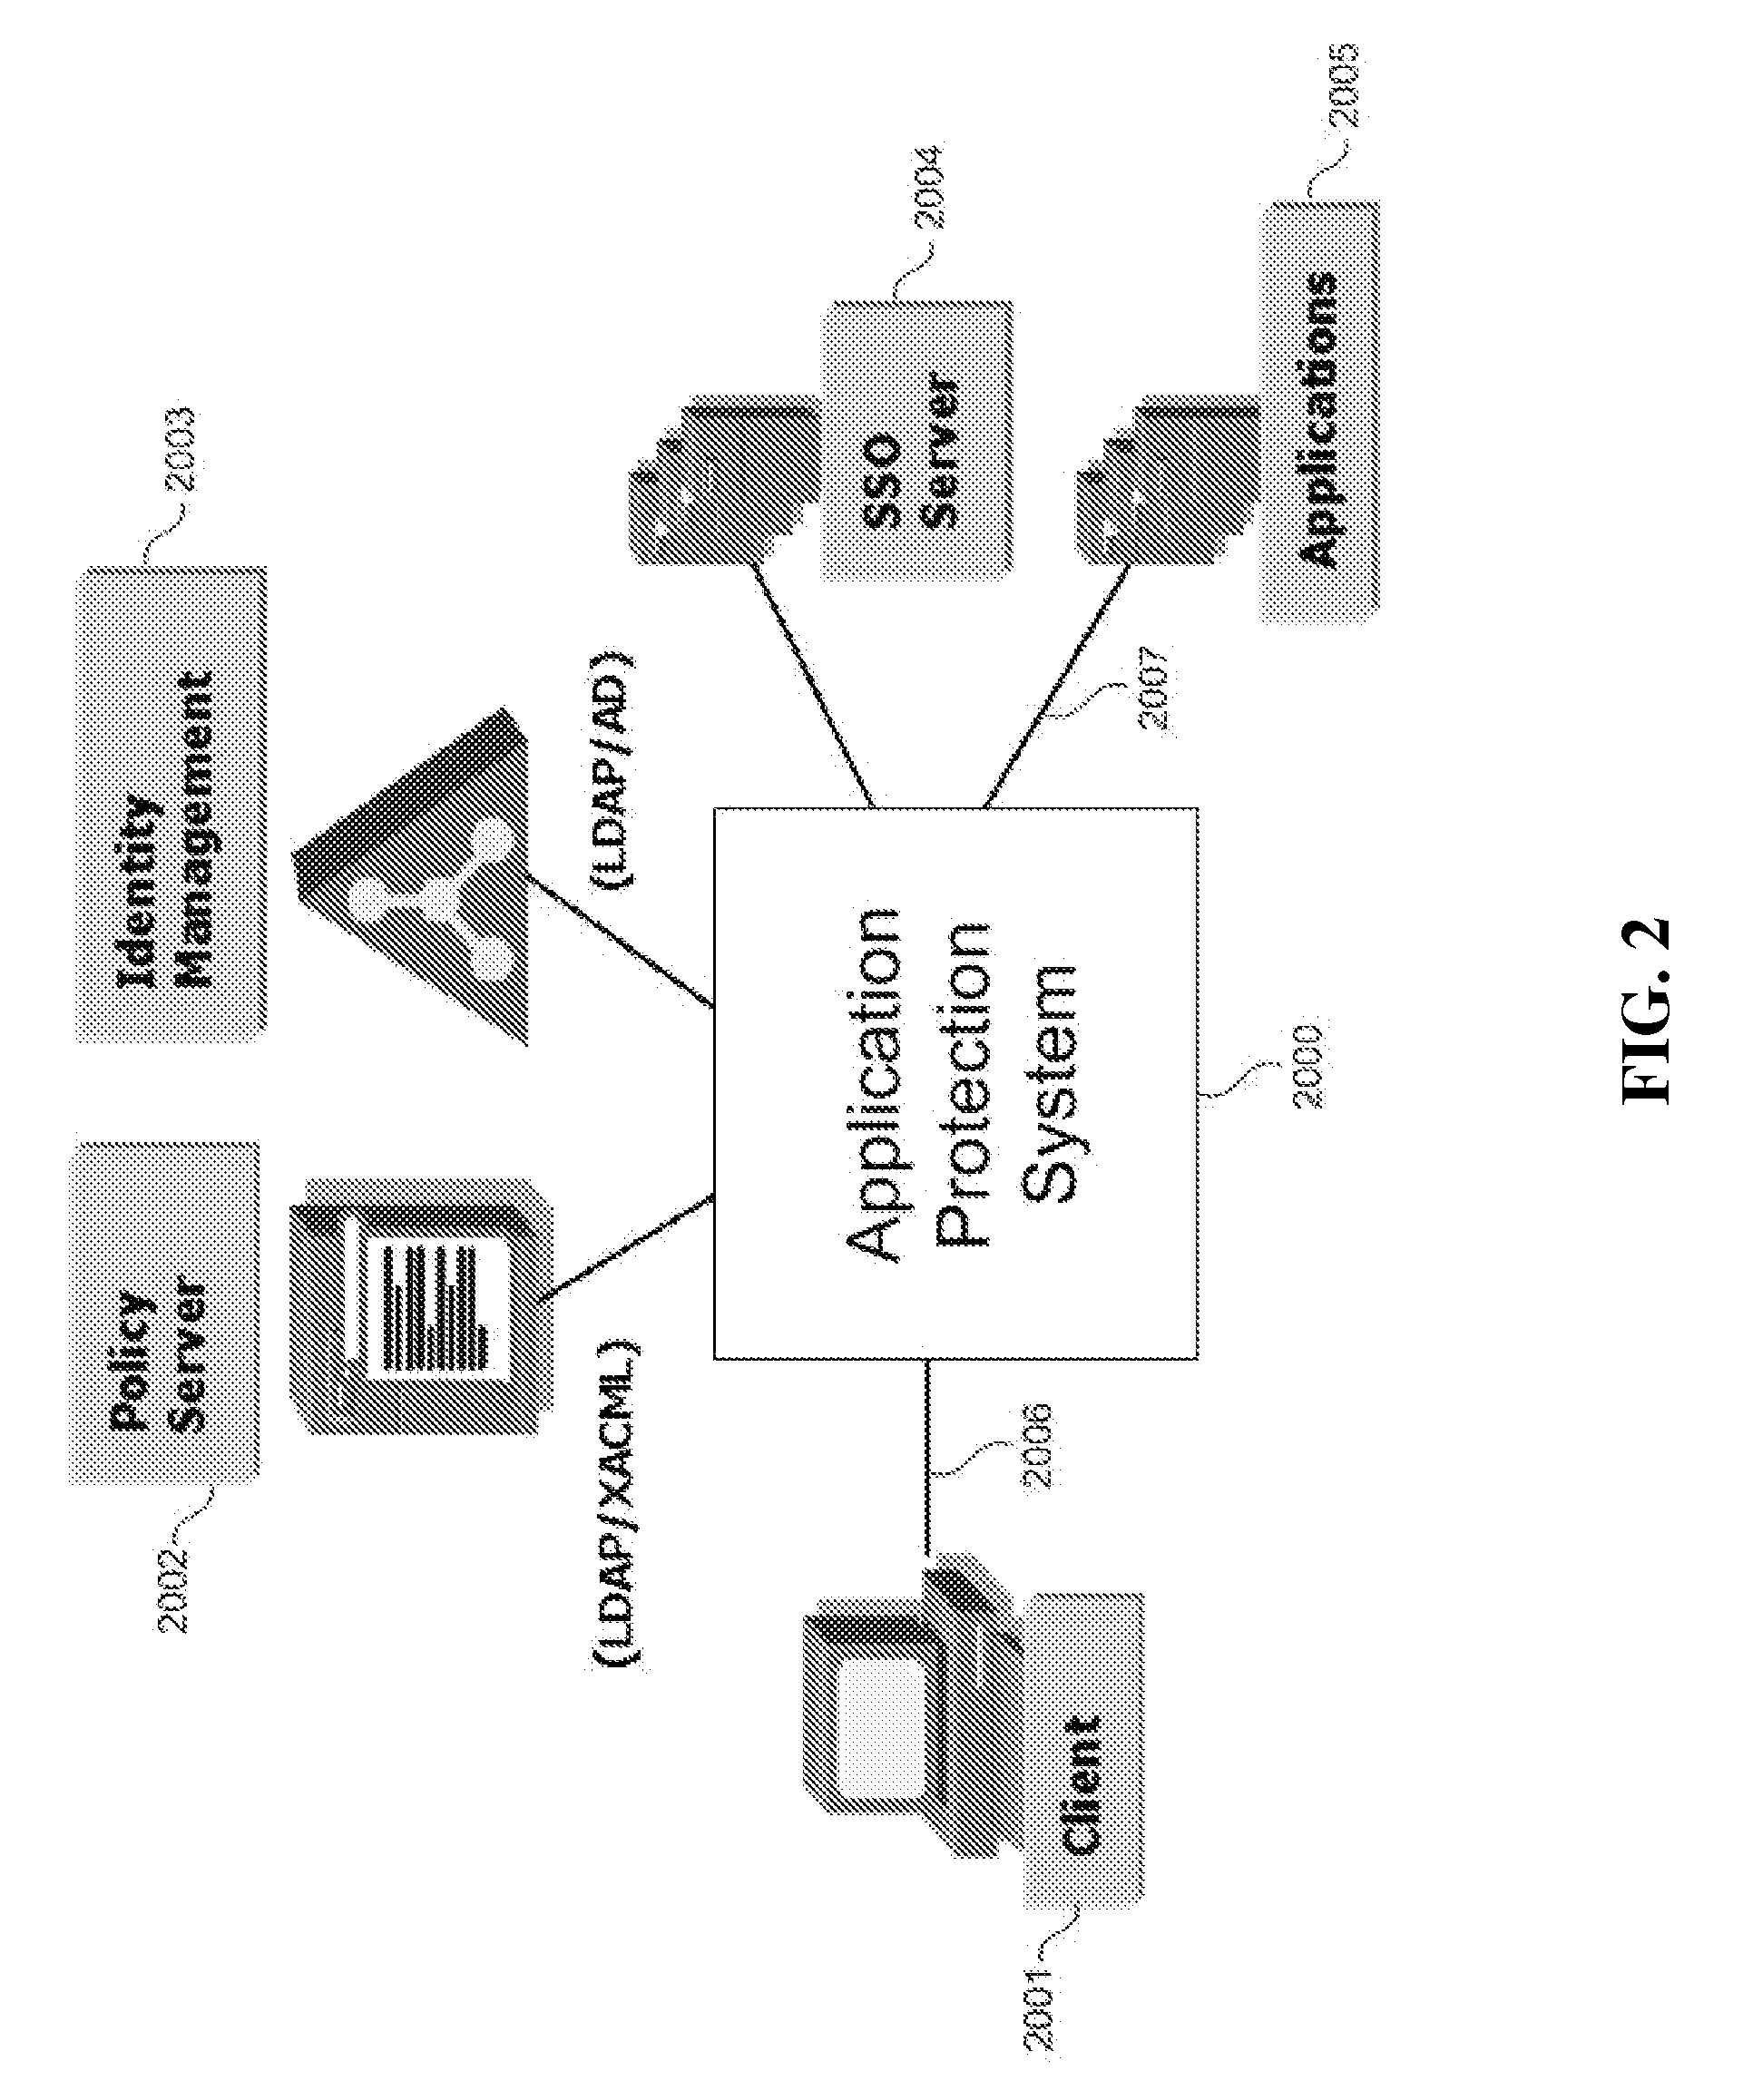 Highly scalable architecture for application network appliances